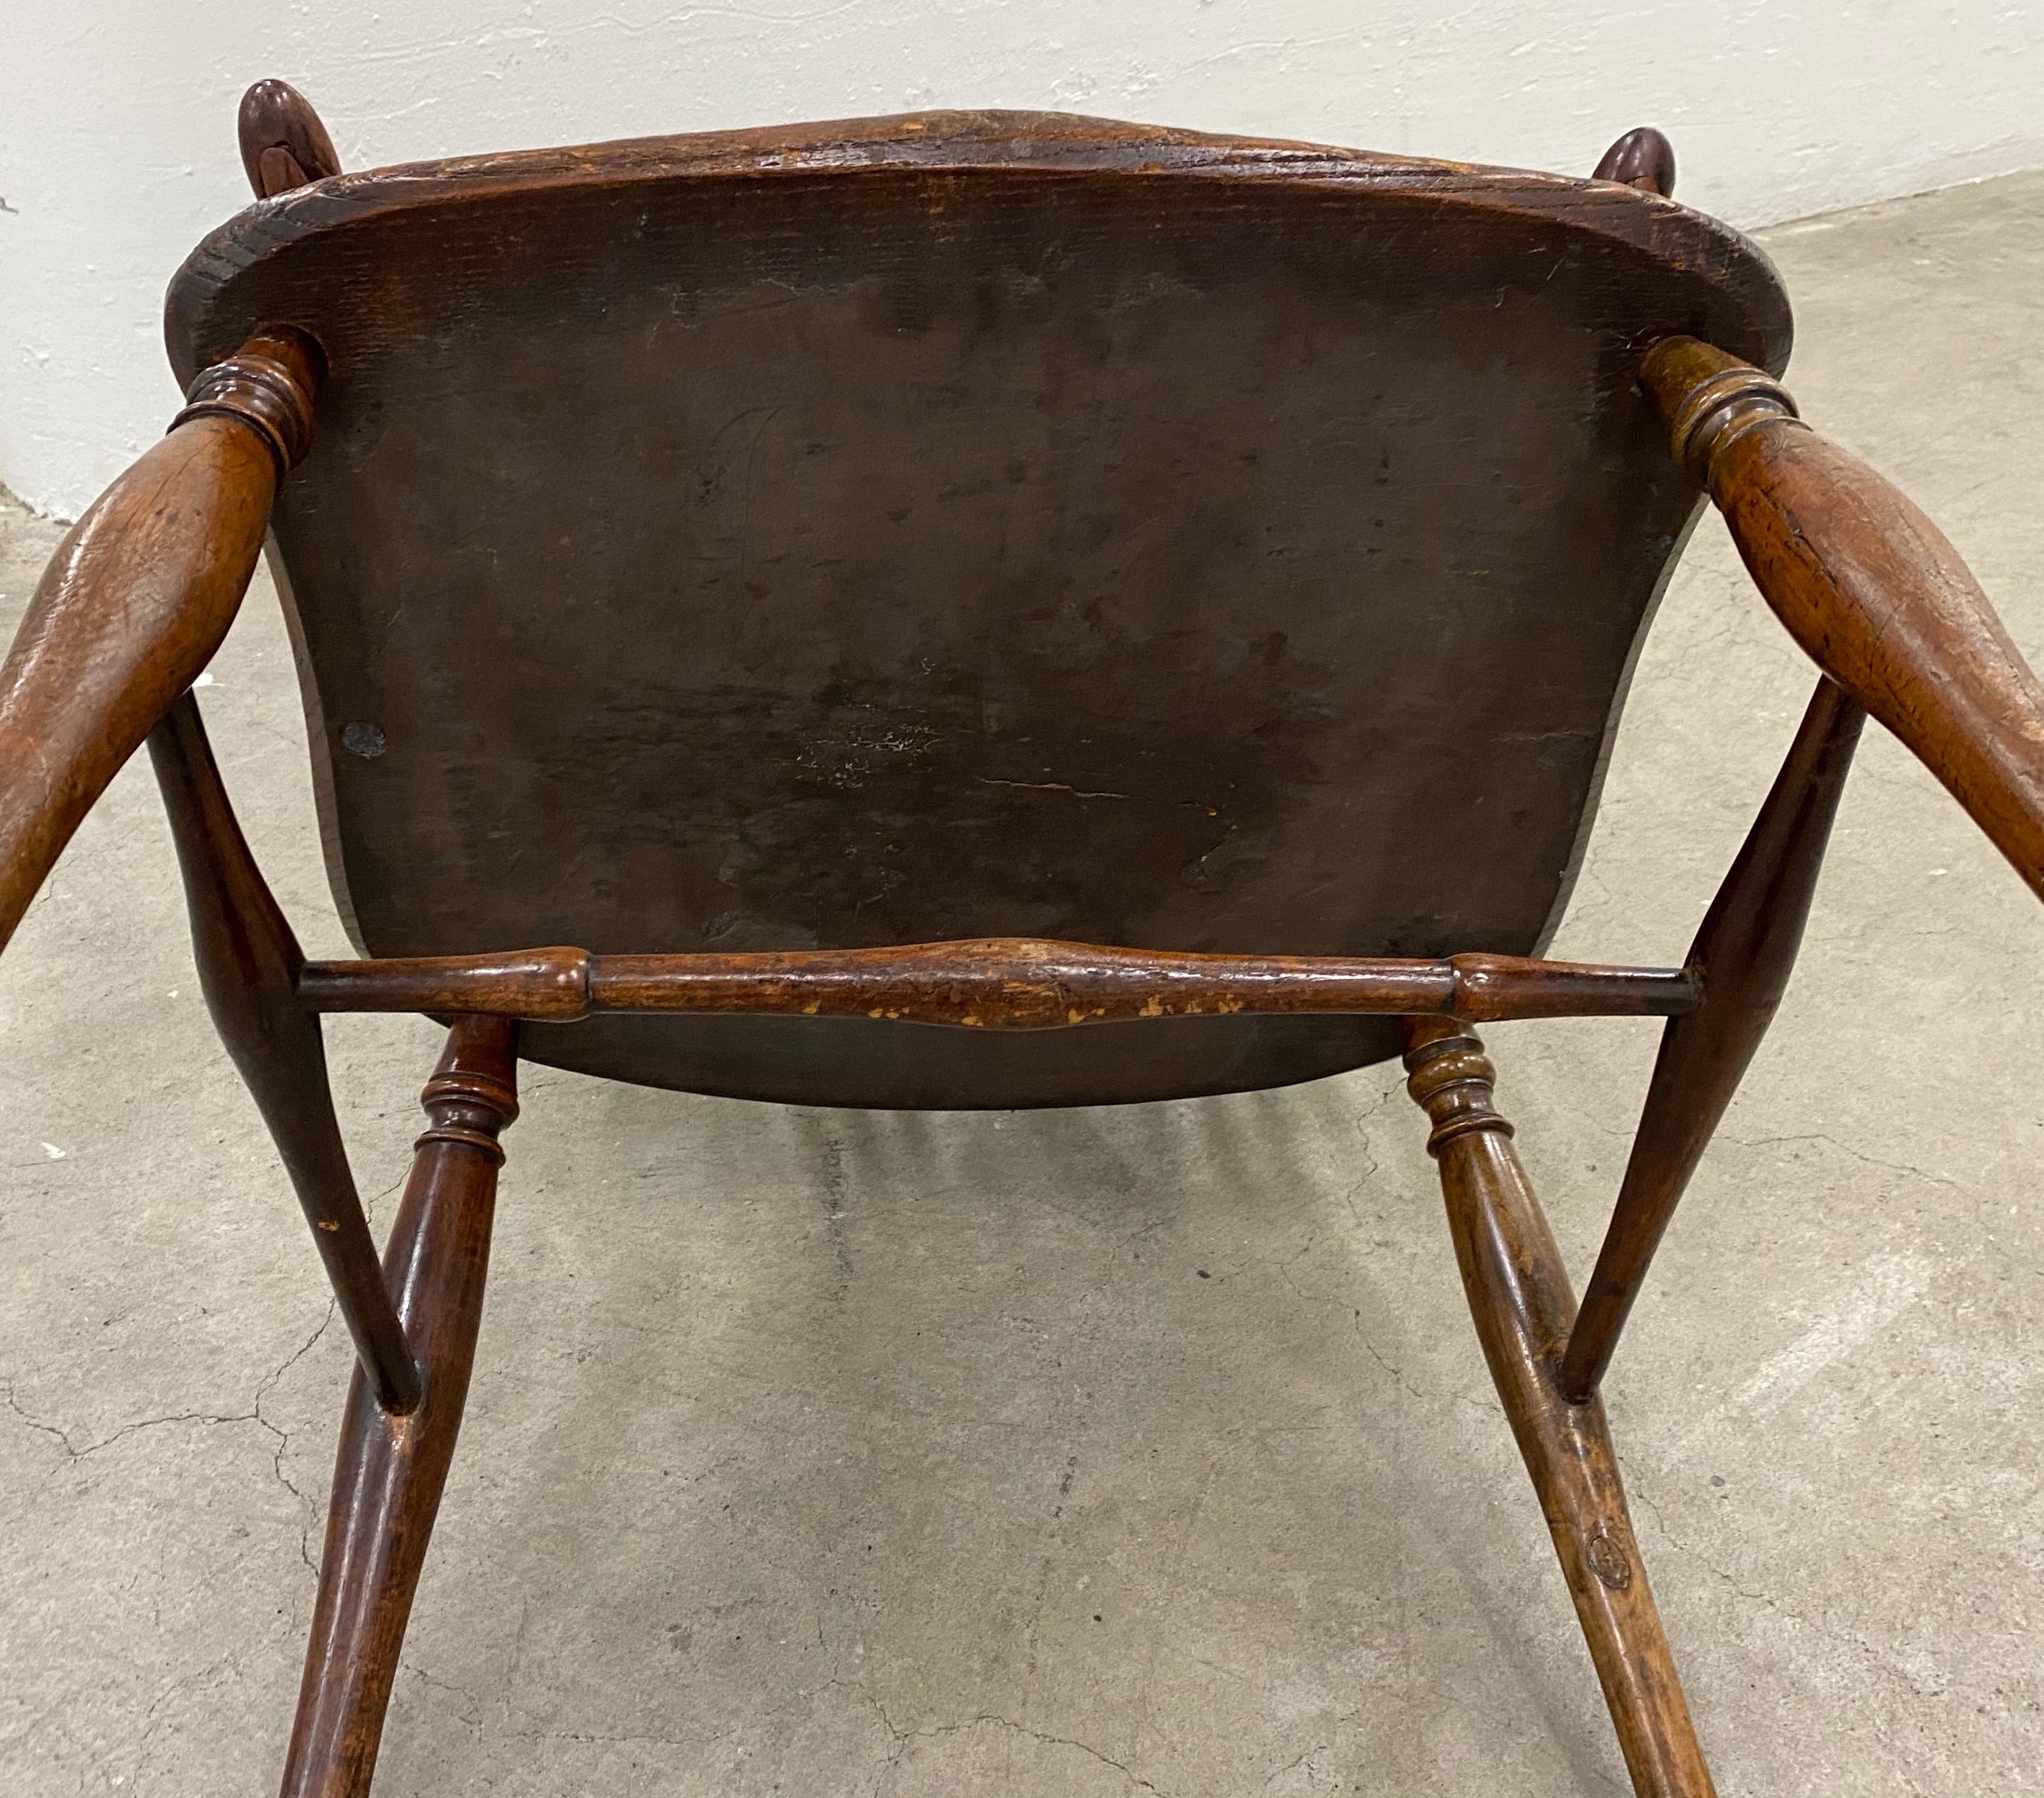 19th Century European Yew Wood High Back Windsor Armchair For Sale 6